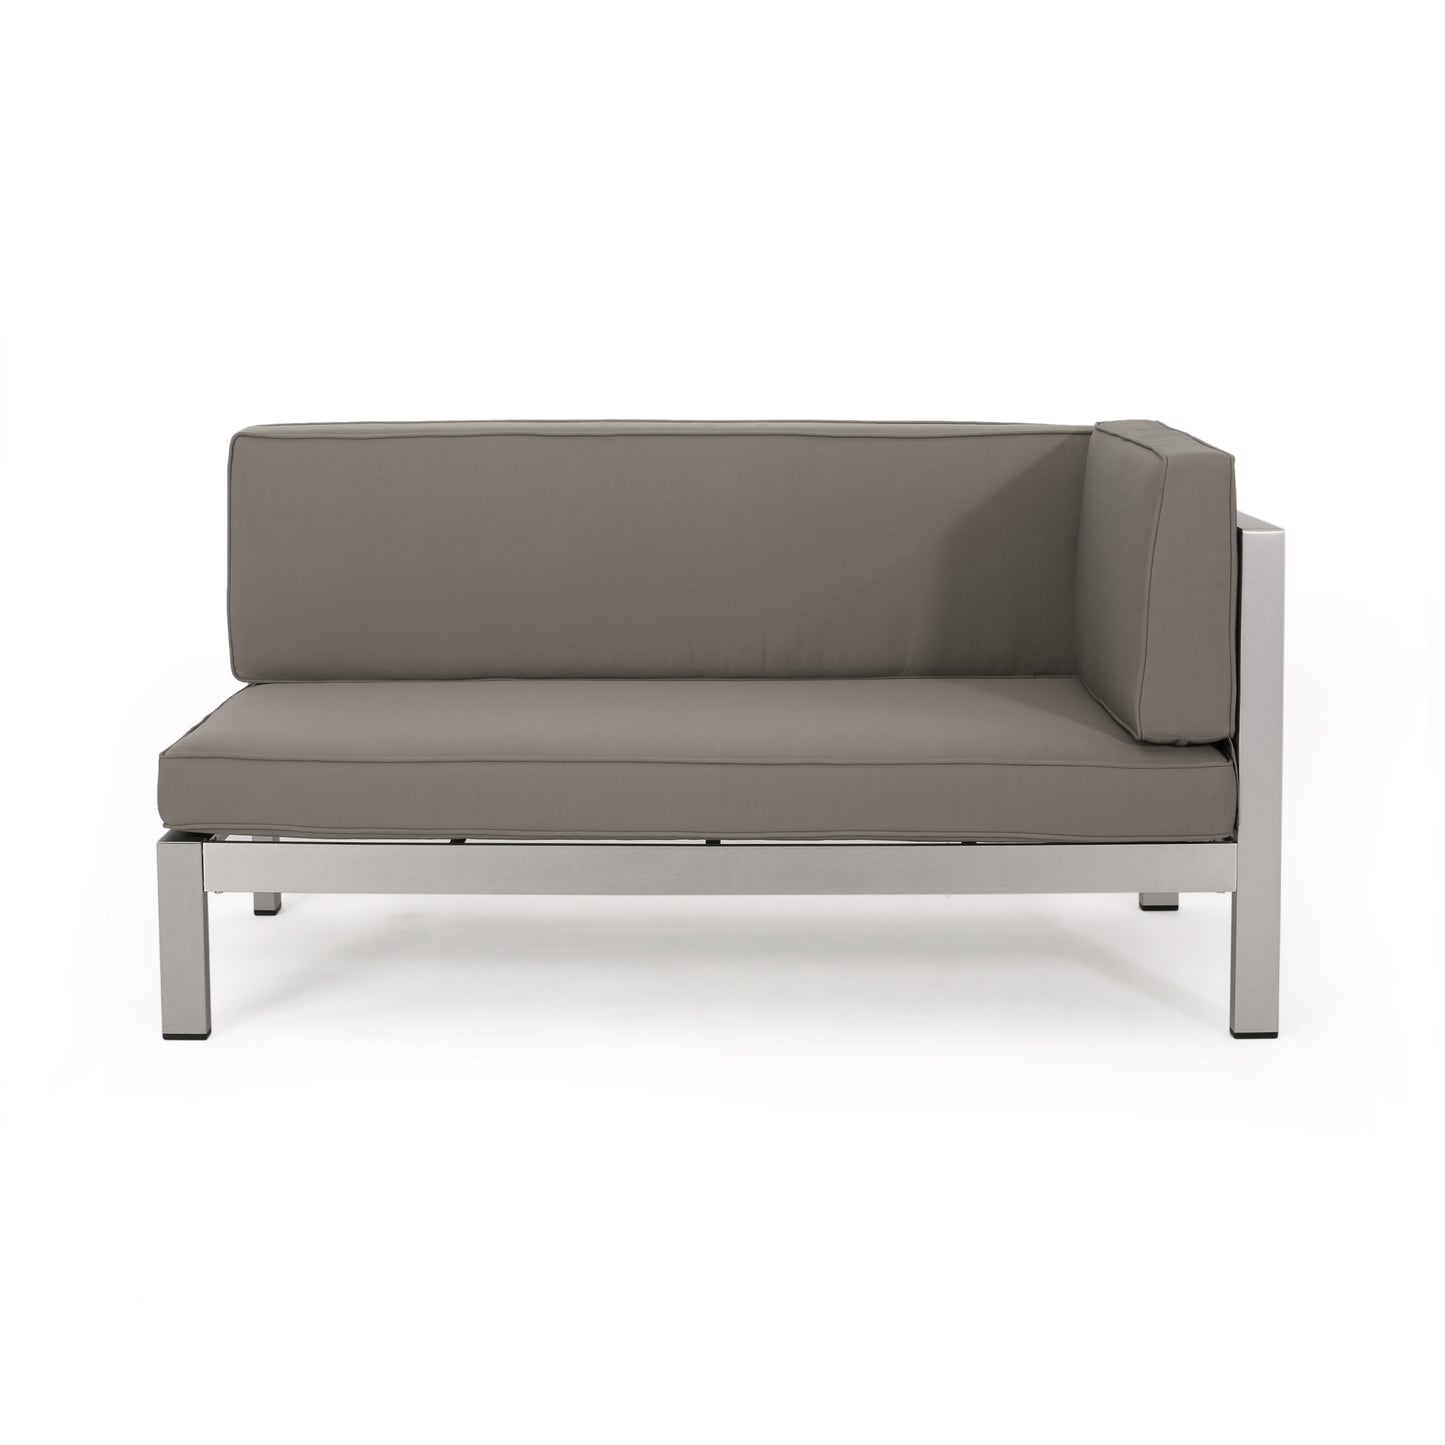 Lompoc Aire Outdoor Modern 5 Seater Sectional Sofa